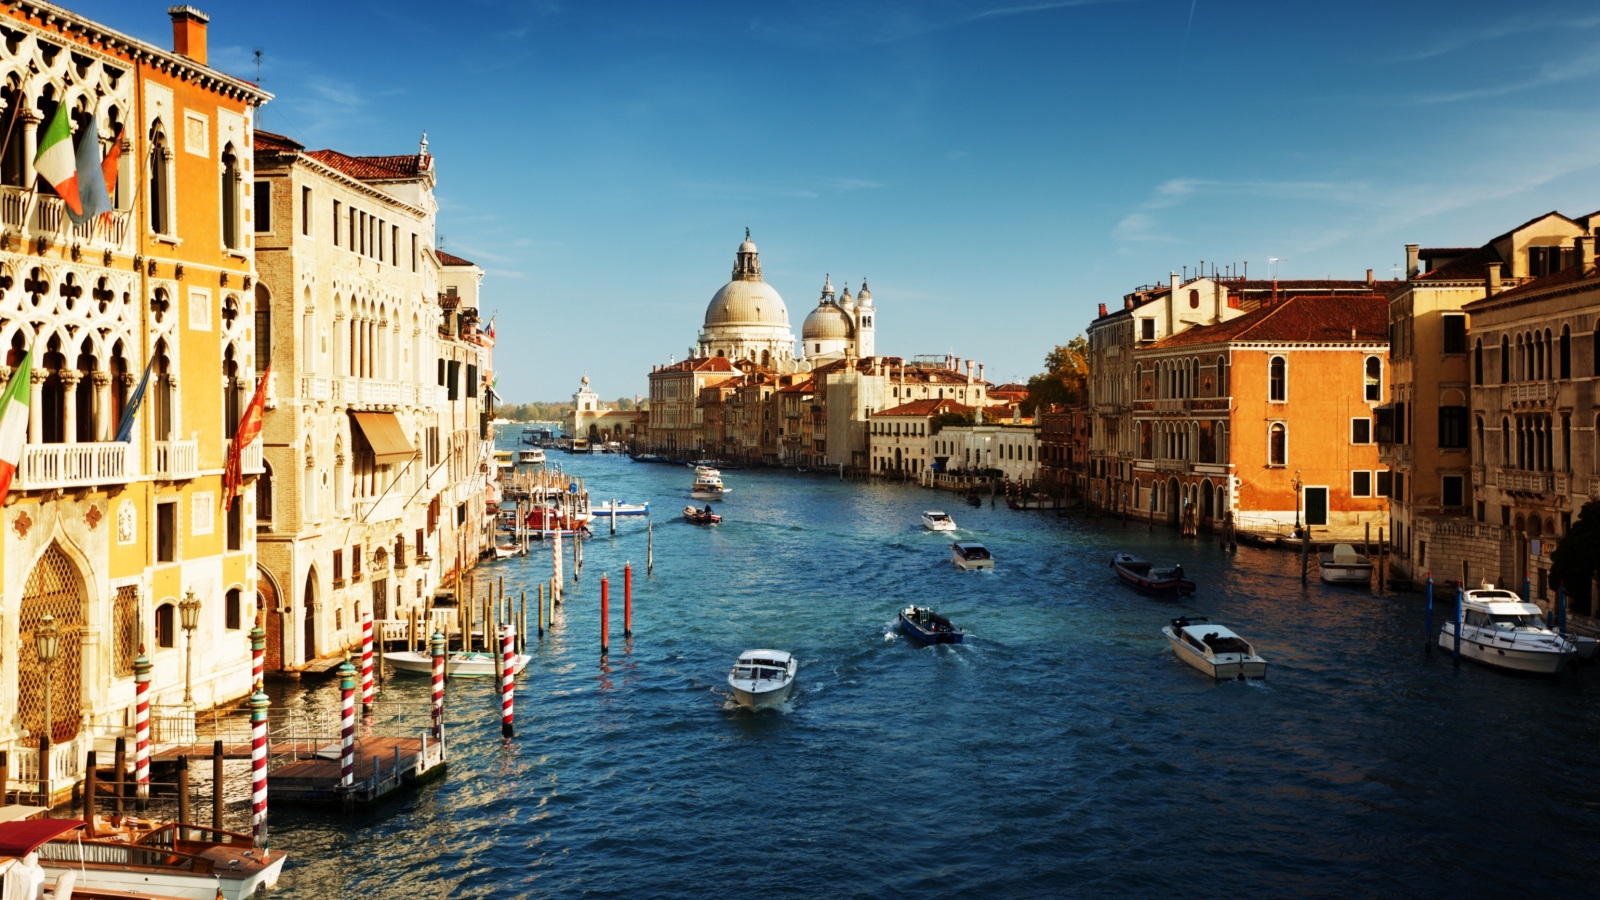 Venice, Italy, The Grand Canal screenshot #1 1600x900